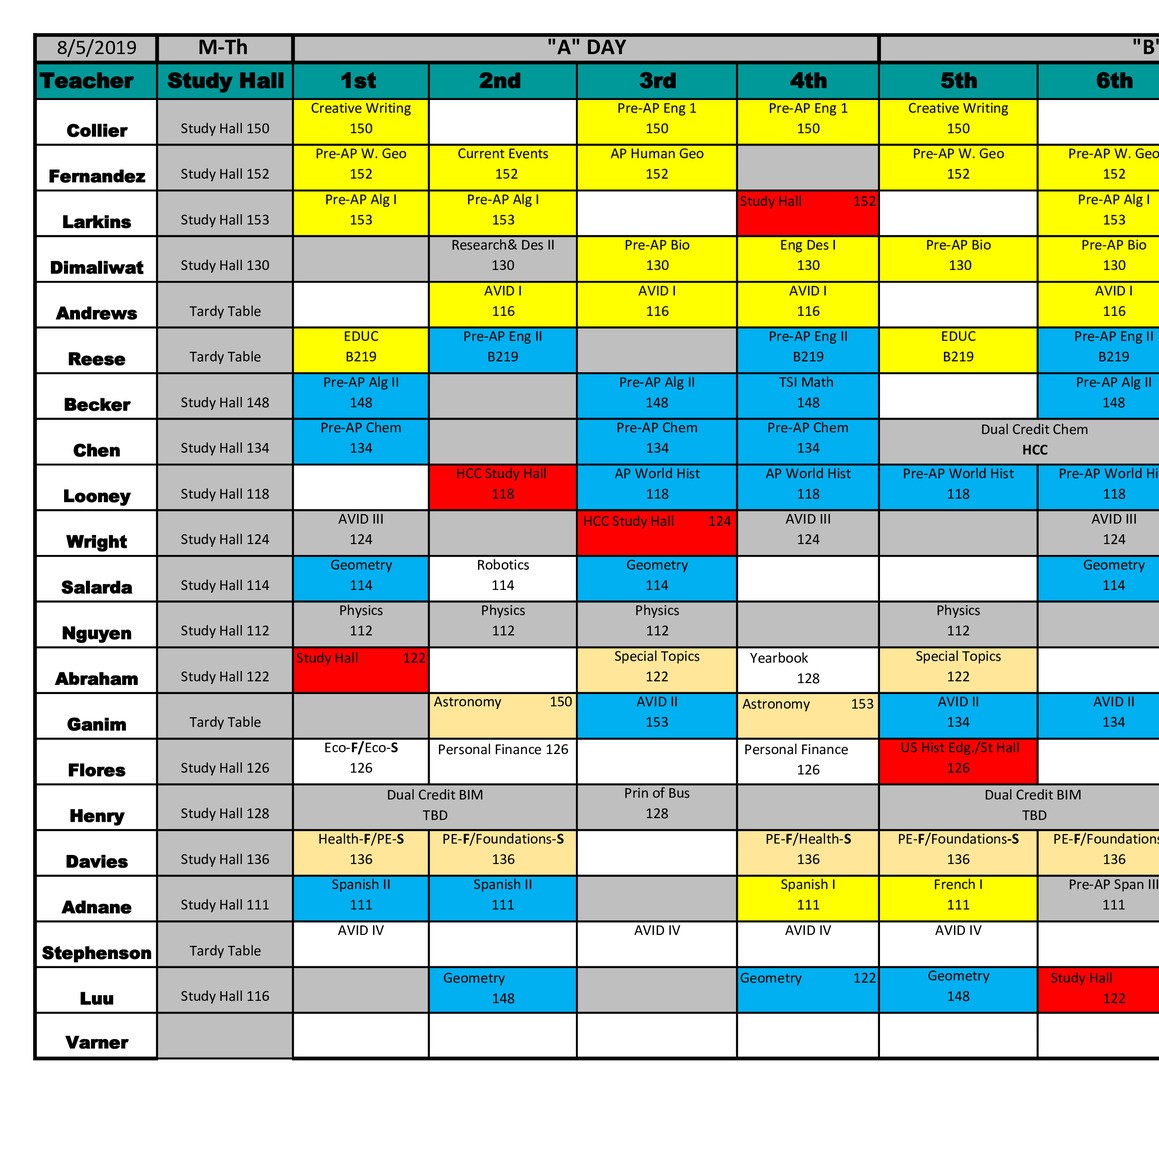 Master Schedule 201920 (Revised 8519)converted.pdf DocDroid